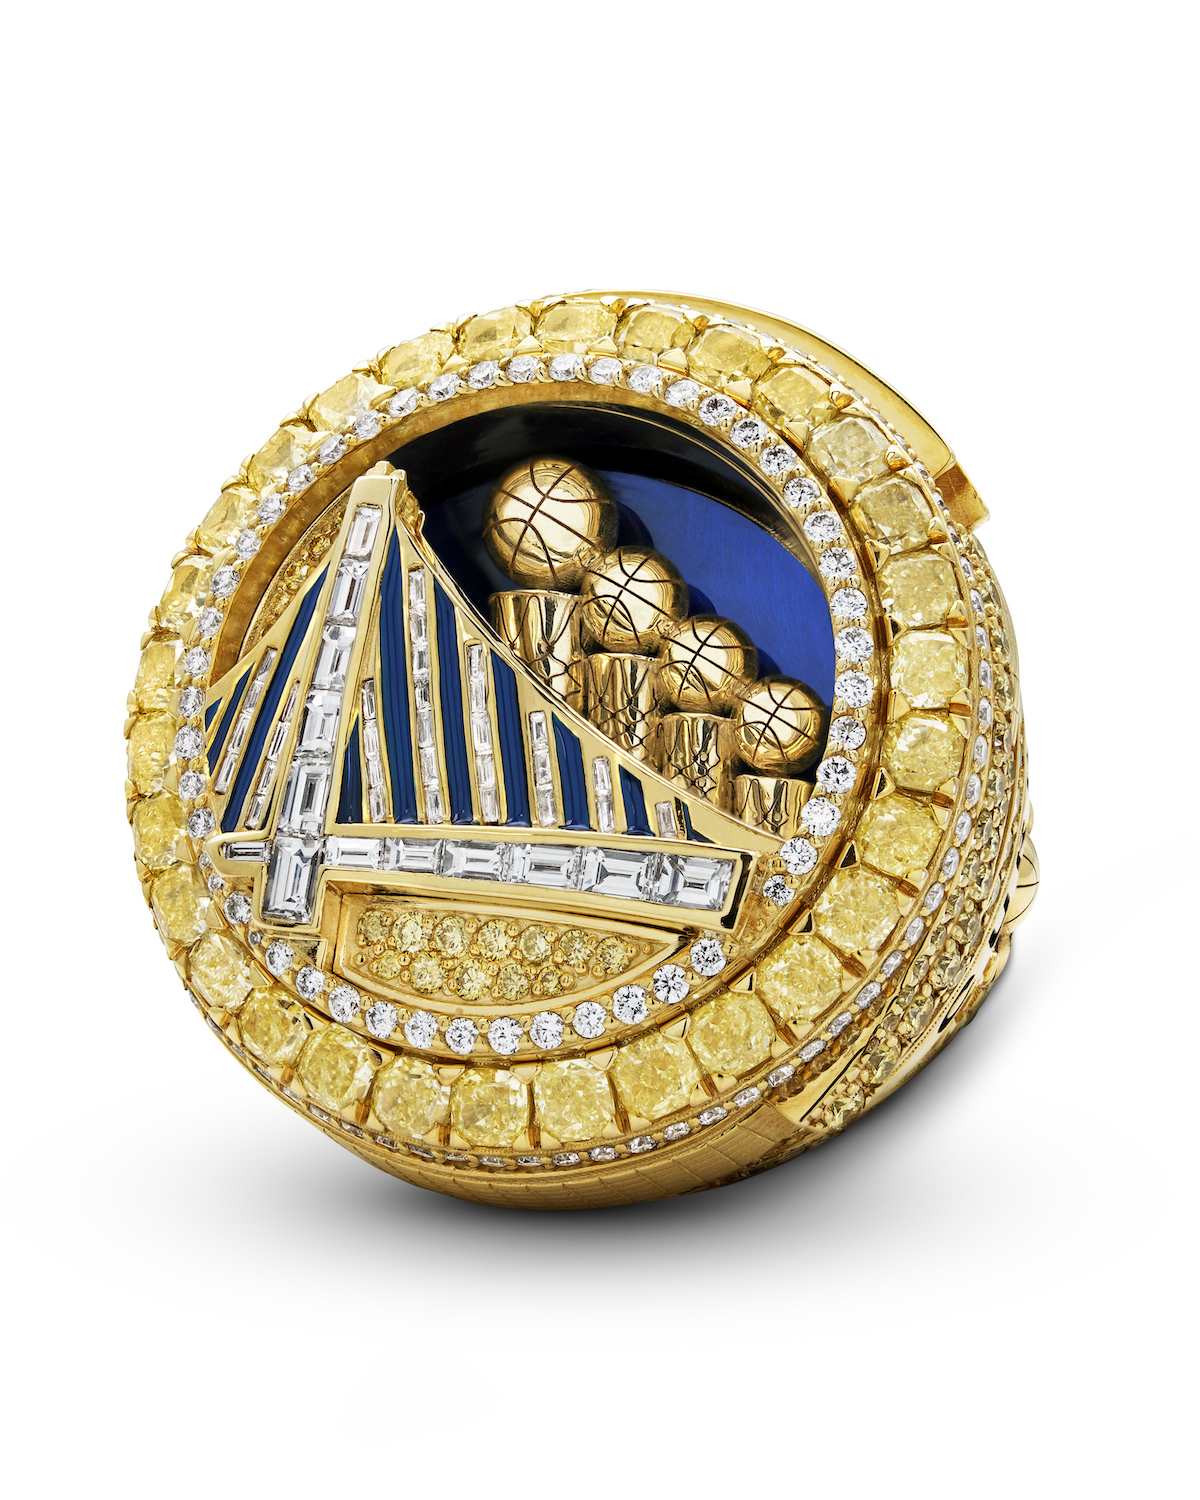 First Look At The Golden State Warriors 2021-22 Championship Ring: 16  Carats Of Yellow And White Diamonds, 7 Carats Of Yellow Diamonds On Bezel -  Fadeaway World